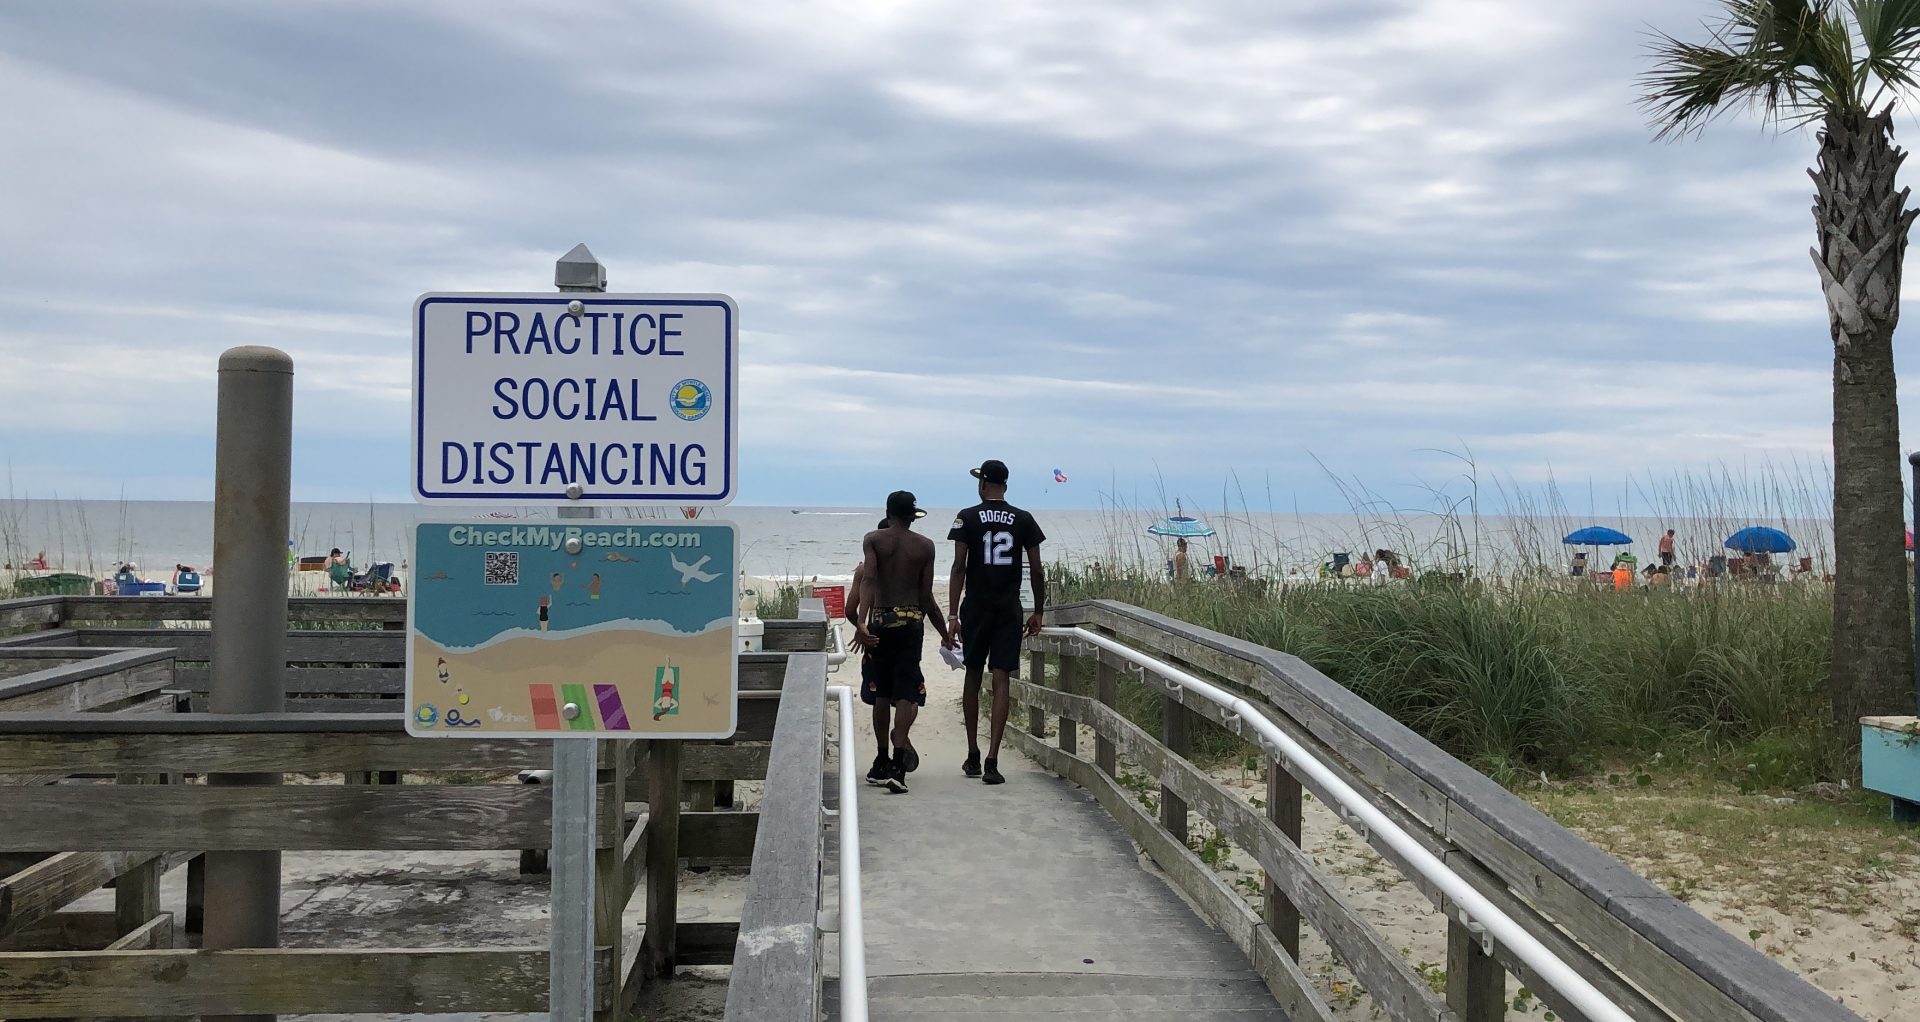 A sign in Myrtle Beach, S.C., Thursday, June 18, 2020, asks people to maintain social distancing on the beach. People are flocking to South Carolina's beaches for vacation after being cooped up by COVID-19 for months. But the virus is taking no vacation as the state has rocketed into the top five in the country in cases divided by population.